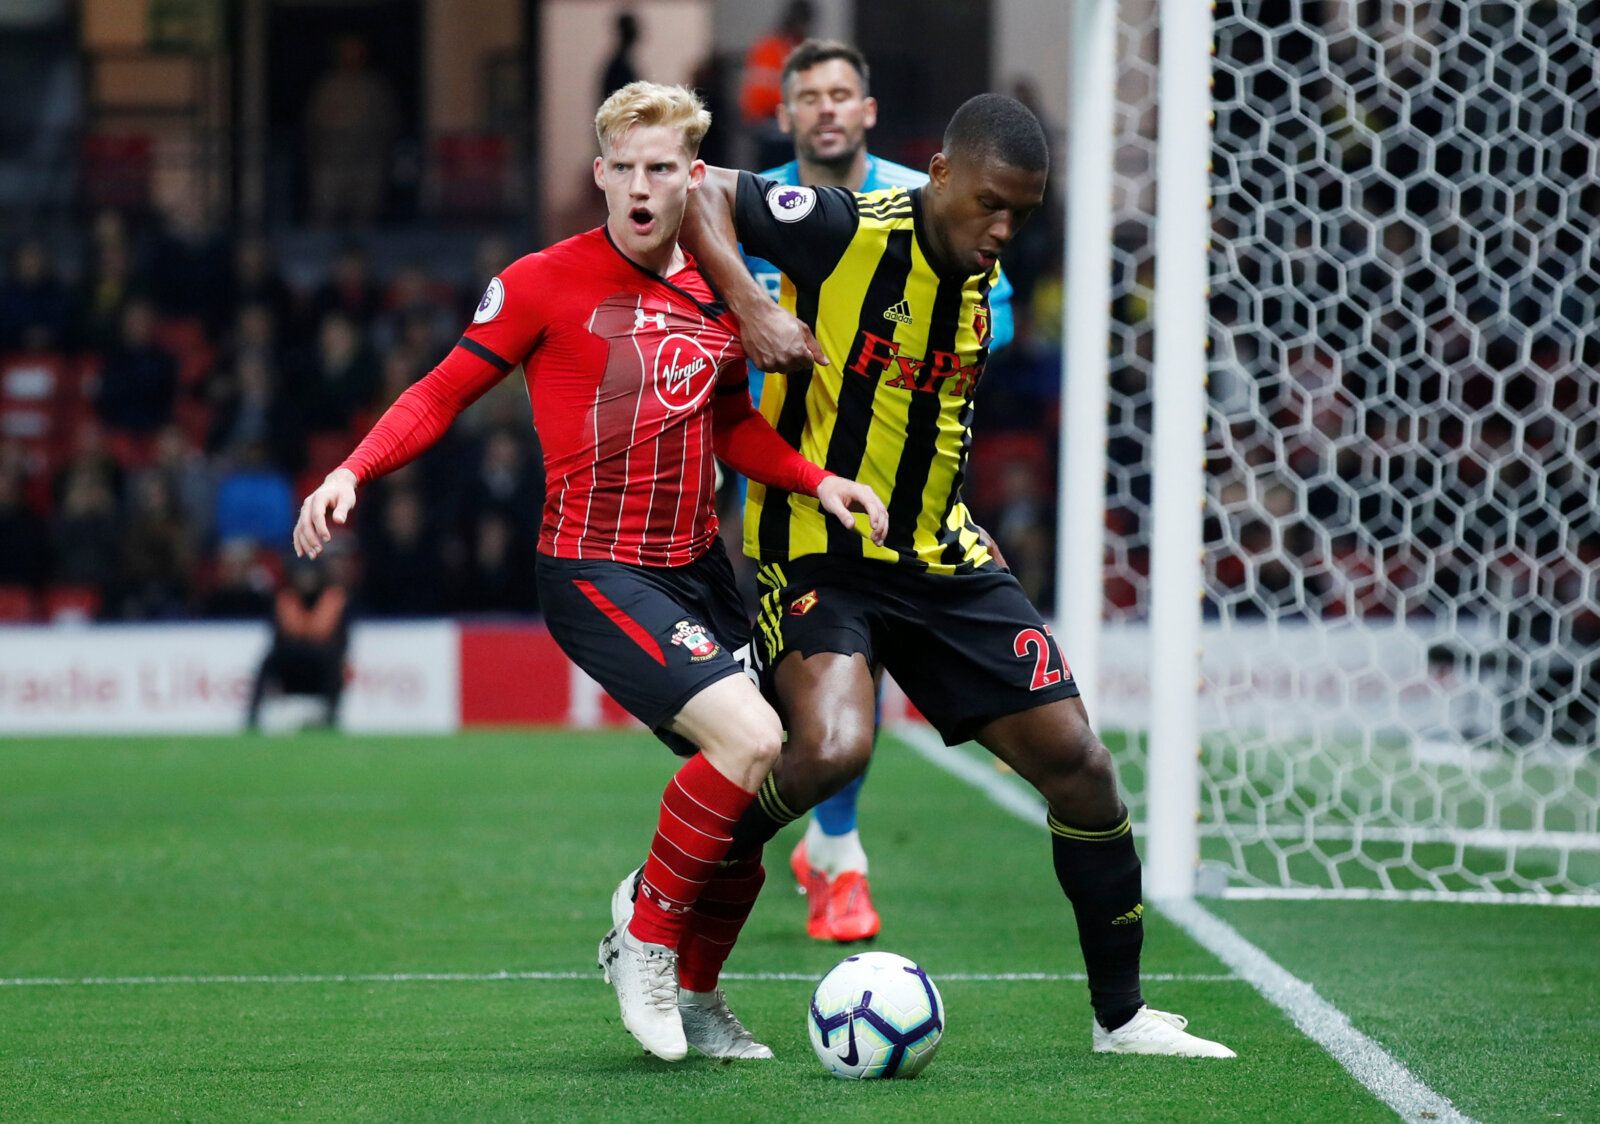 Soccer Football - Premier League - Watford v Southampton - Vicarage Road, Watford, Britain - April 23, 2019  Southampton's Josh Sims in action with Watford's Christian Kabasele              REUTERS/David Klein  EDITORIAL USE ONLY. No use with unauthorized audio, video, data, fixture lists, club/league logos or 